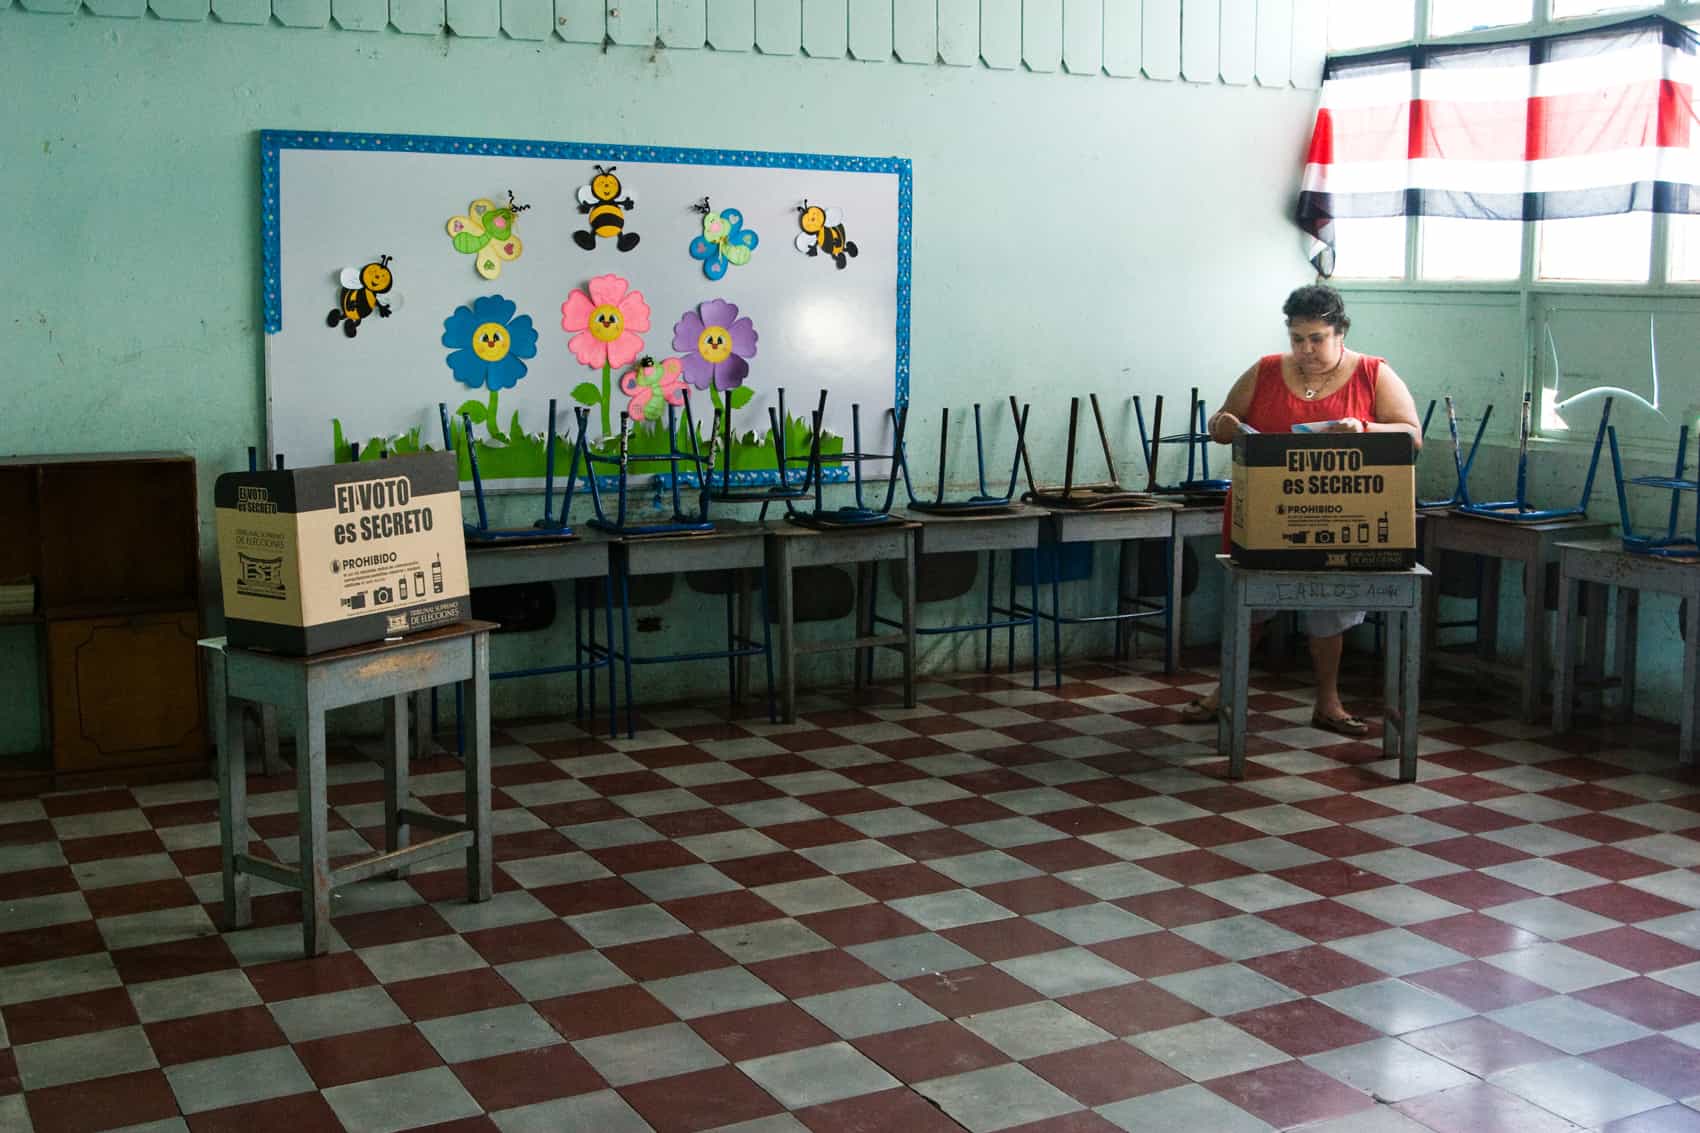 A woman votes in Costa Rica elections